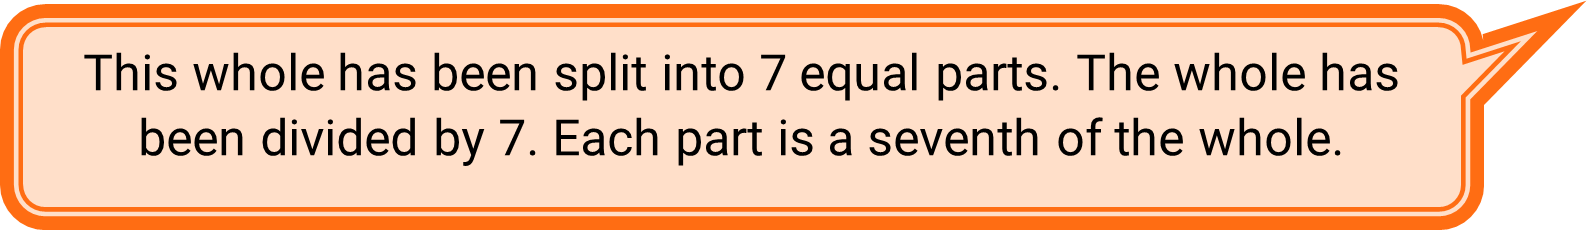 2The whole has been split into 7 equal parts. The whole has been divided by 7. Each part is a seventh of the whole."